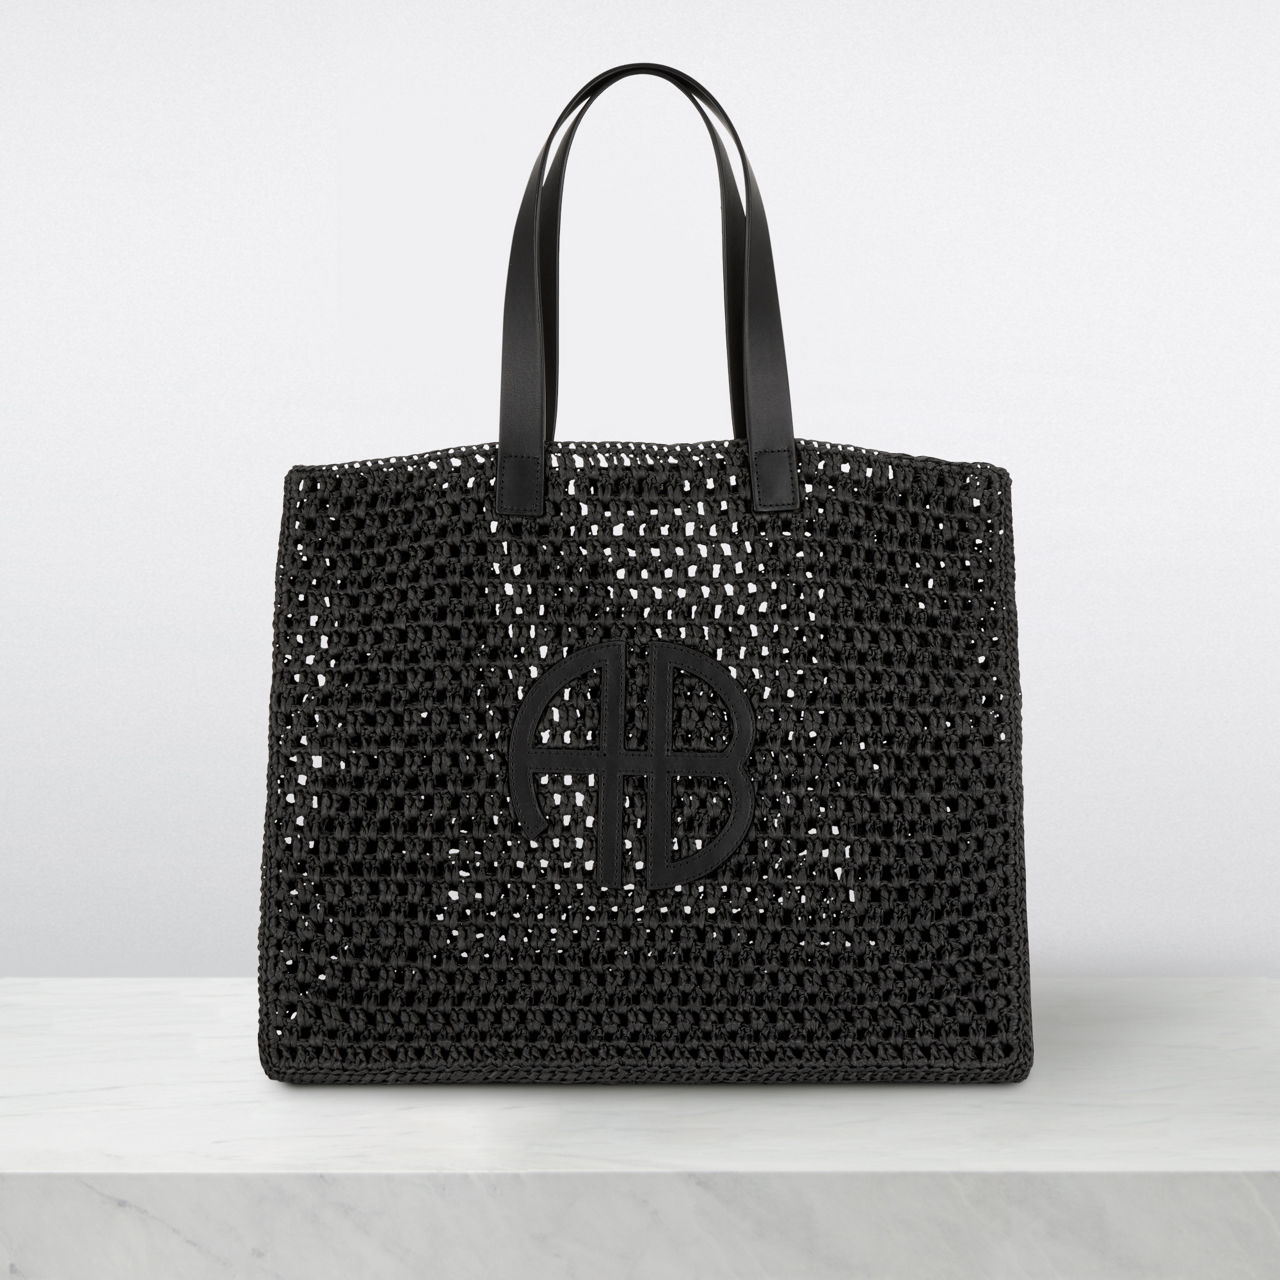 ANINE BING  The Kate Tote is finally here! It's the ultimate tote